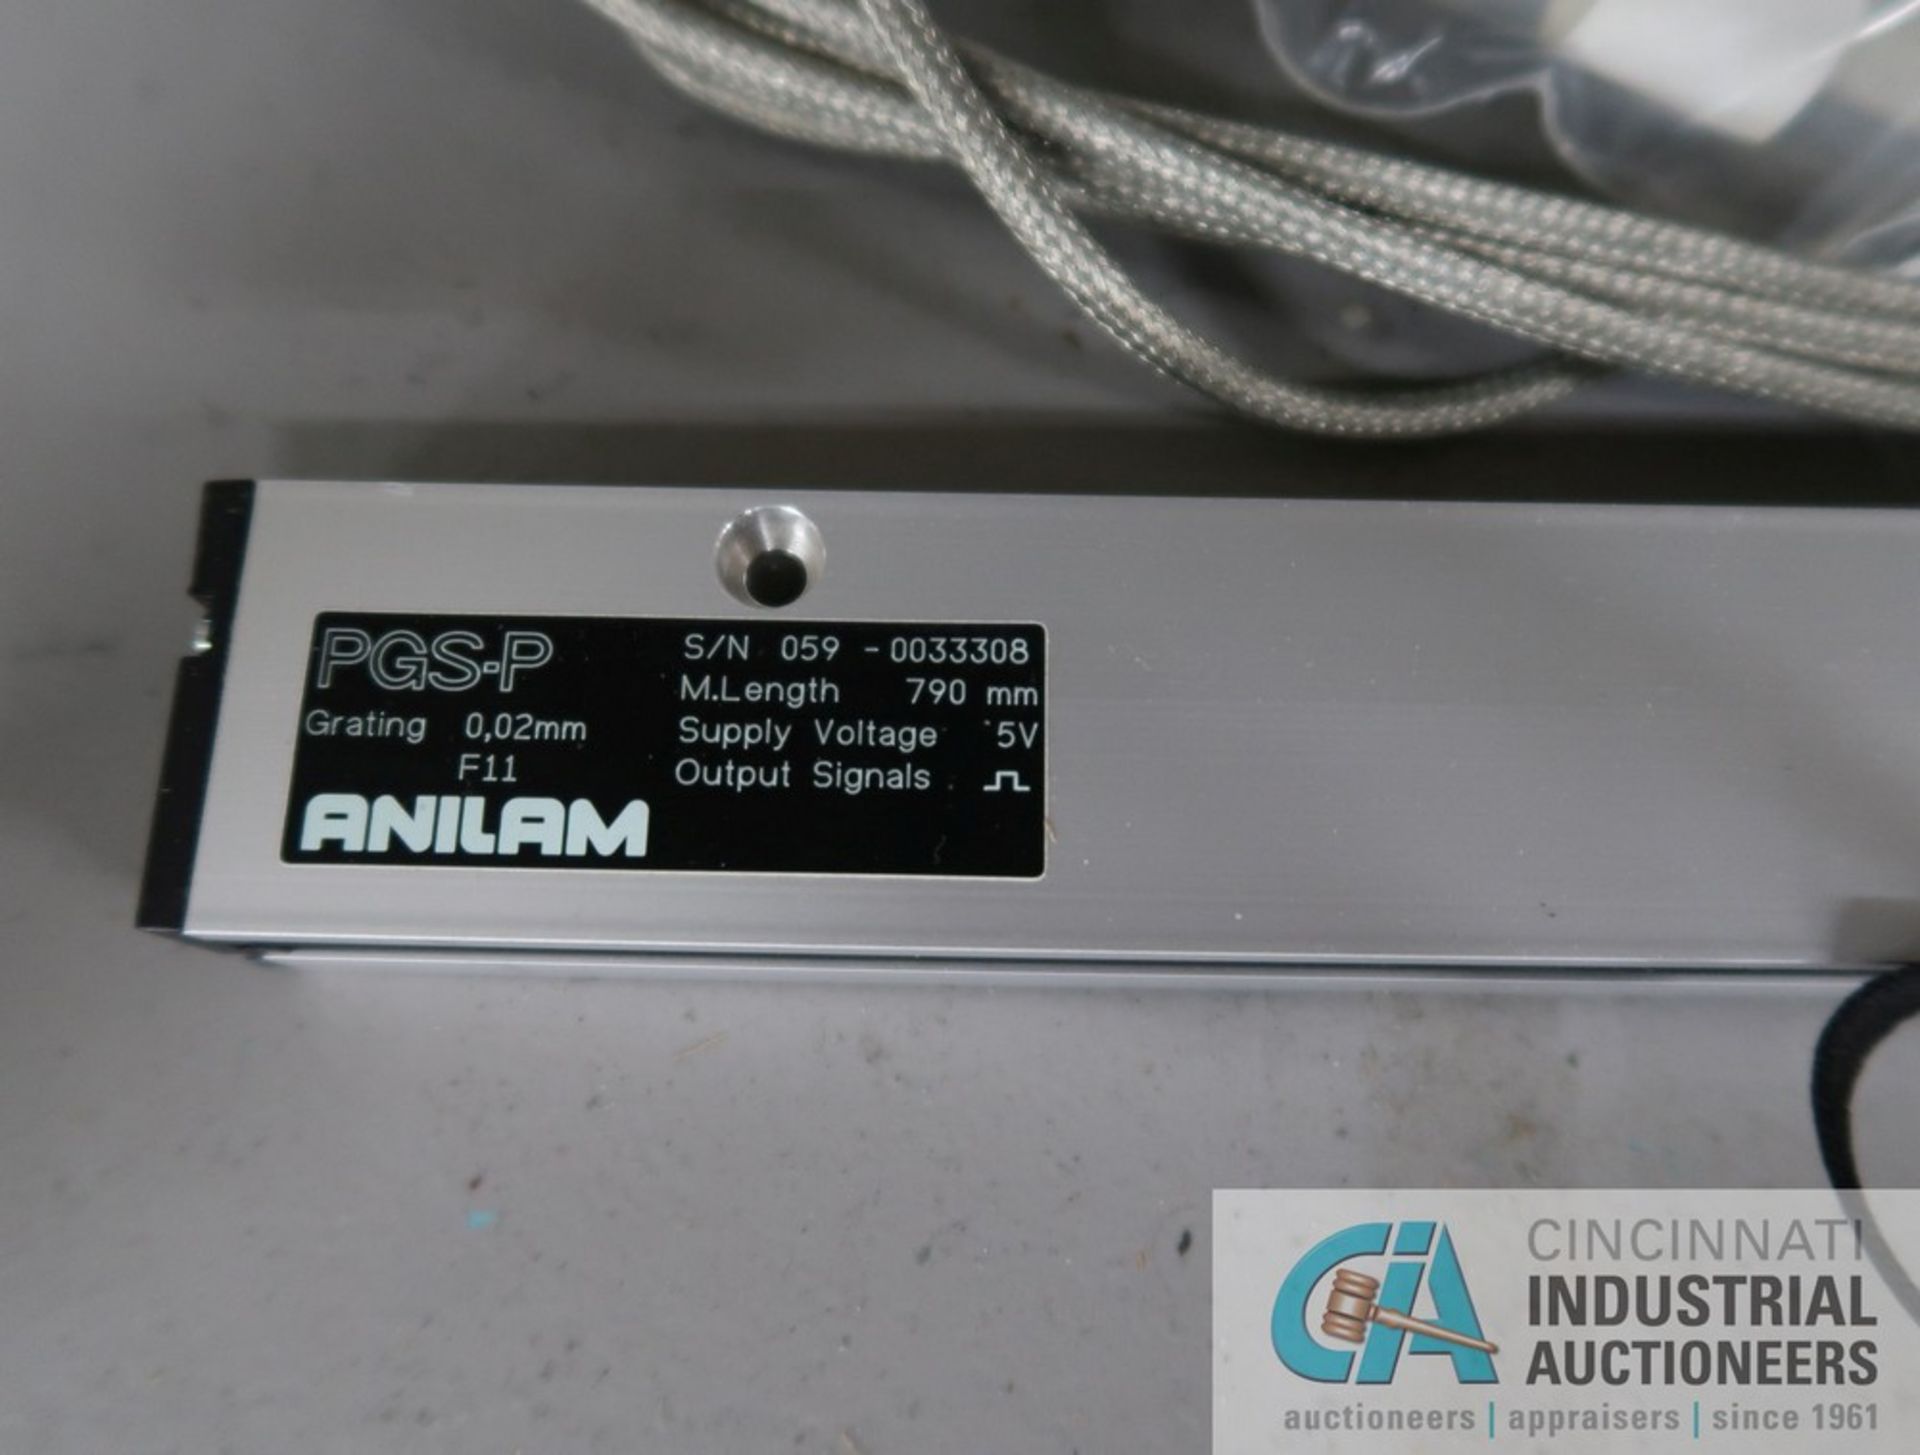 ENCODERS, (1) 900 MM, (1) 400 MM ANILAM RBS-1 AND (1) 750 MM ANILAM PGS-P ENCODERS *BRAND NEW* - Image 2 of 4